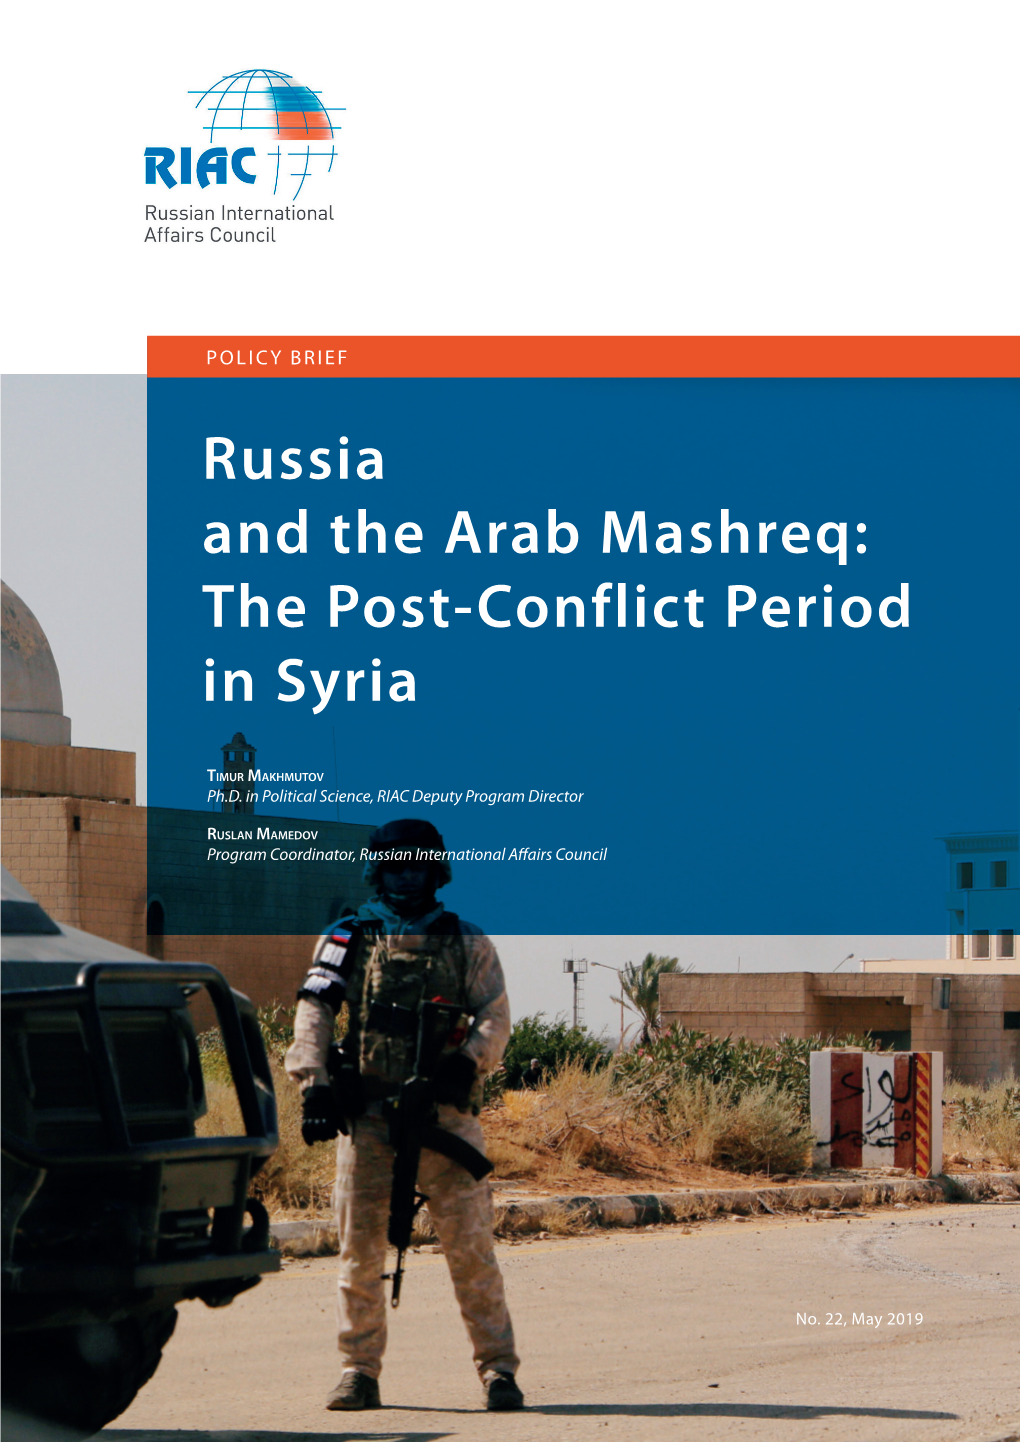 Russia and the Arab Mashreq: the Post-Conflict Period in Syria